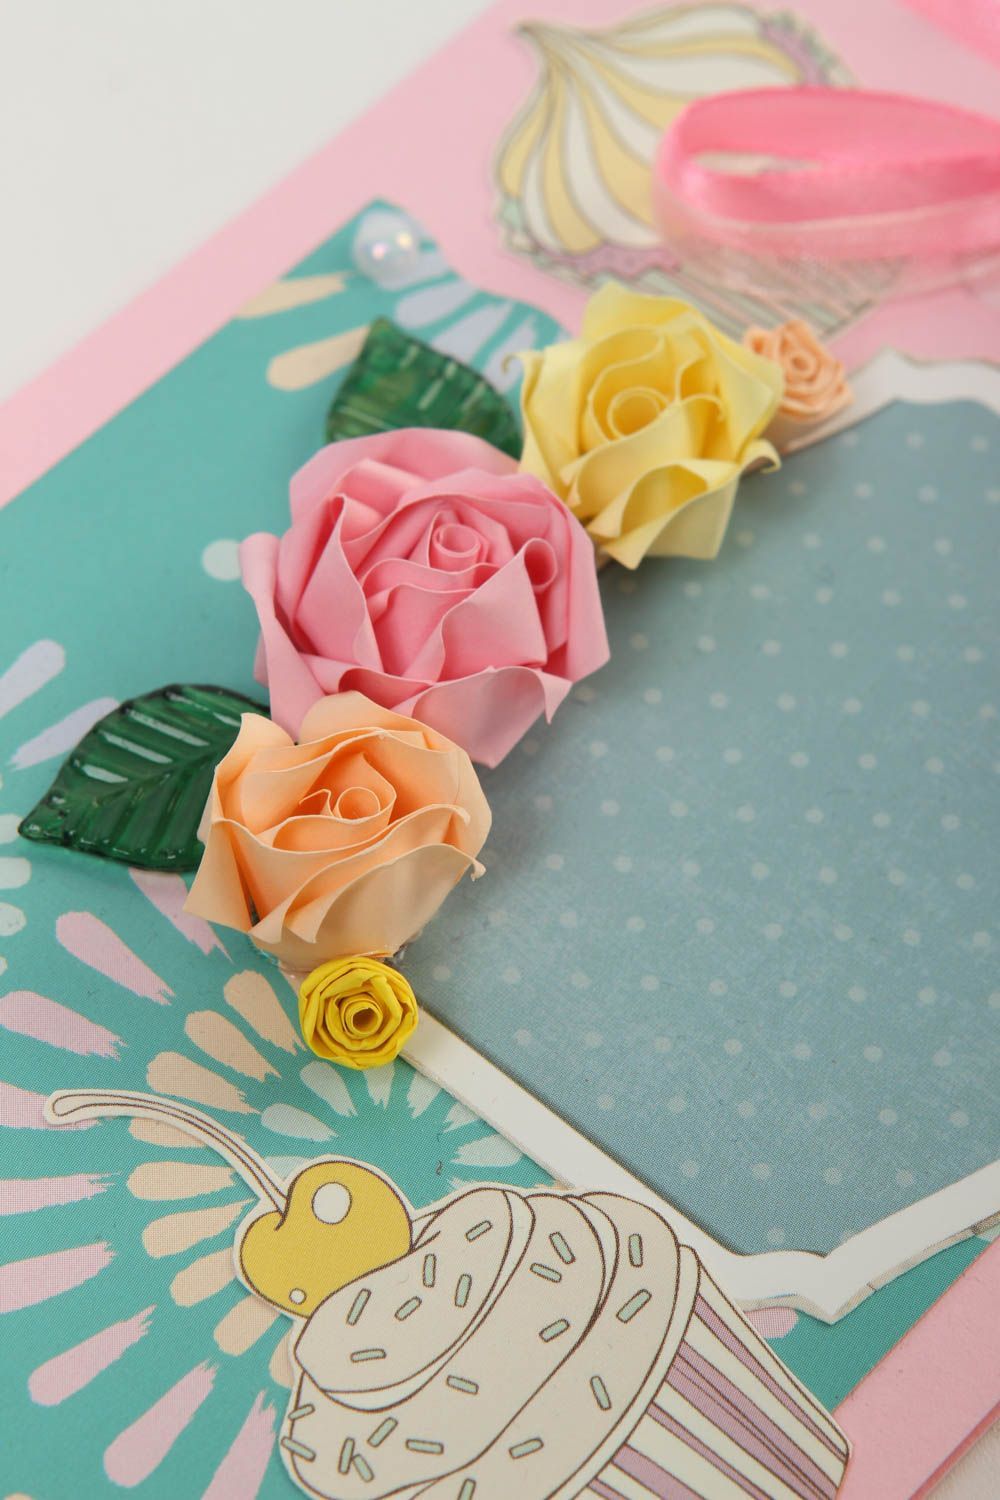 Exclusive handmade greeting card cute quilling card birthday gift ideas photo 2